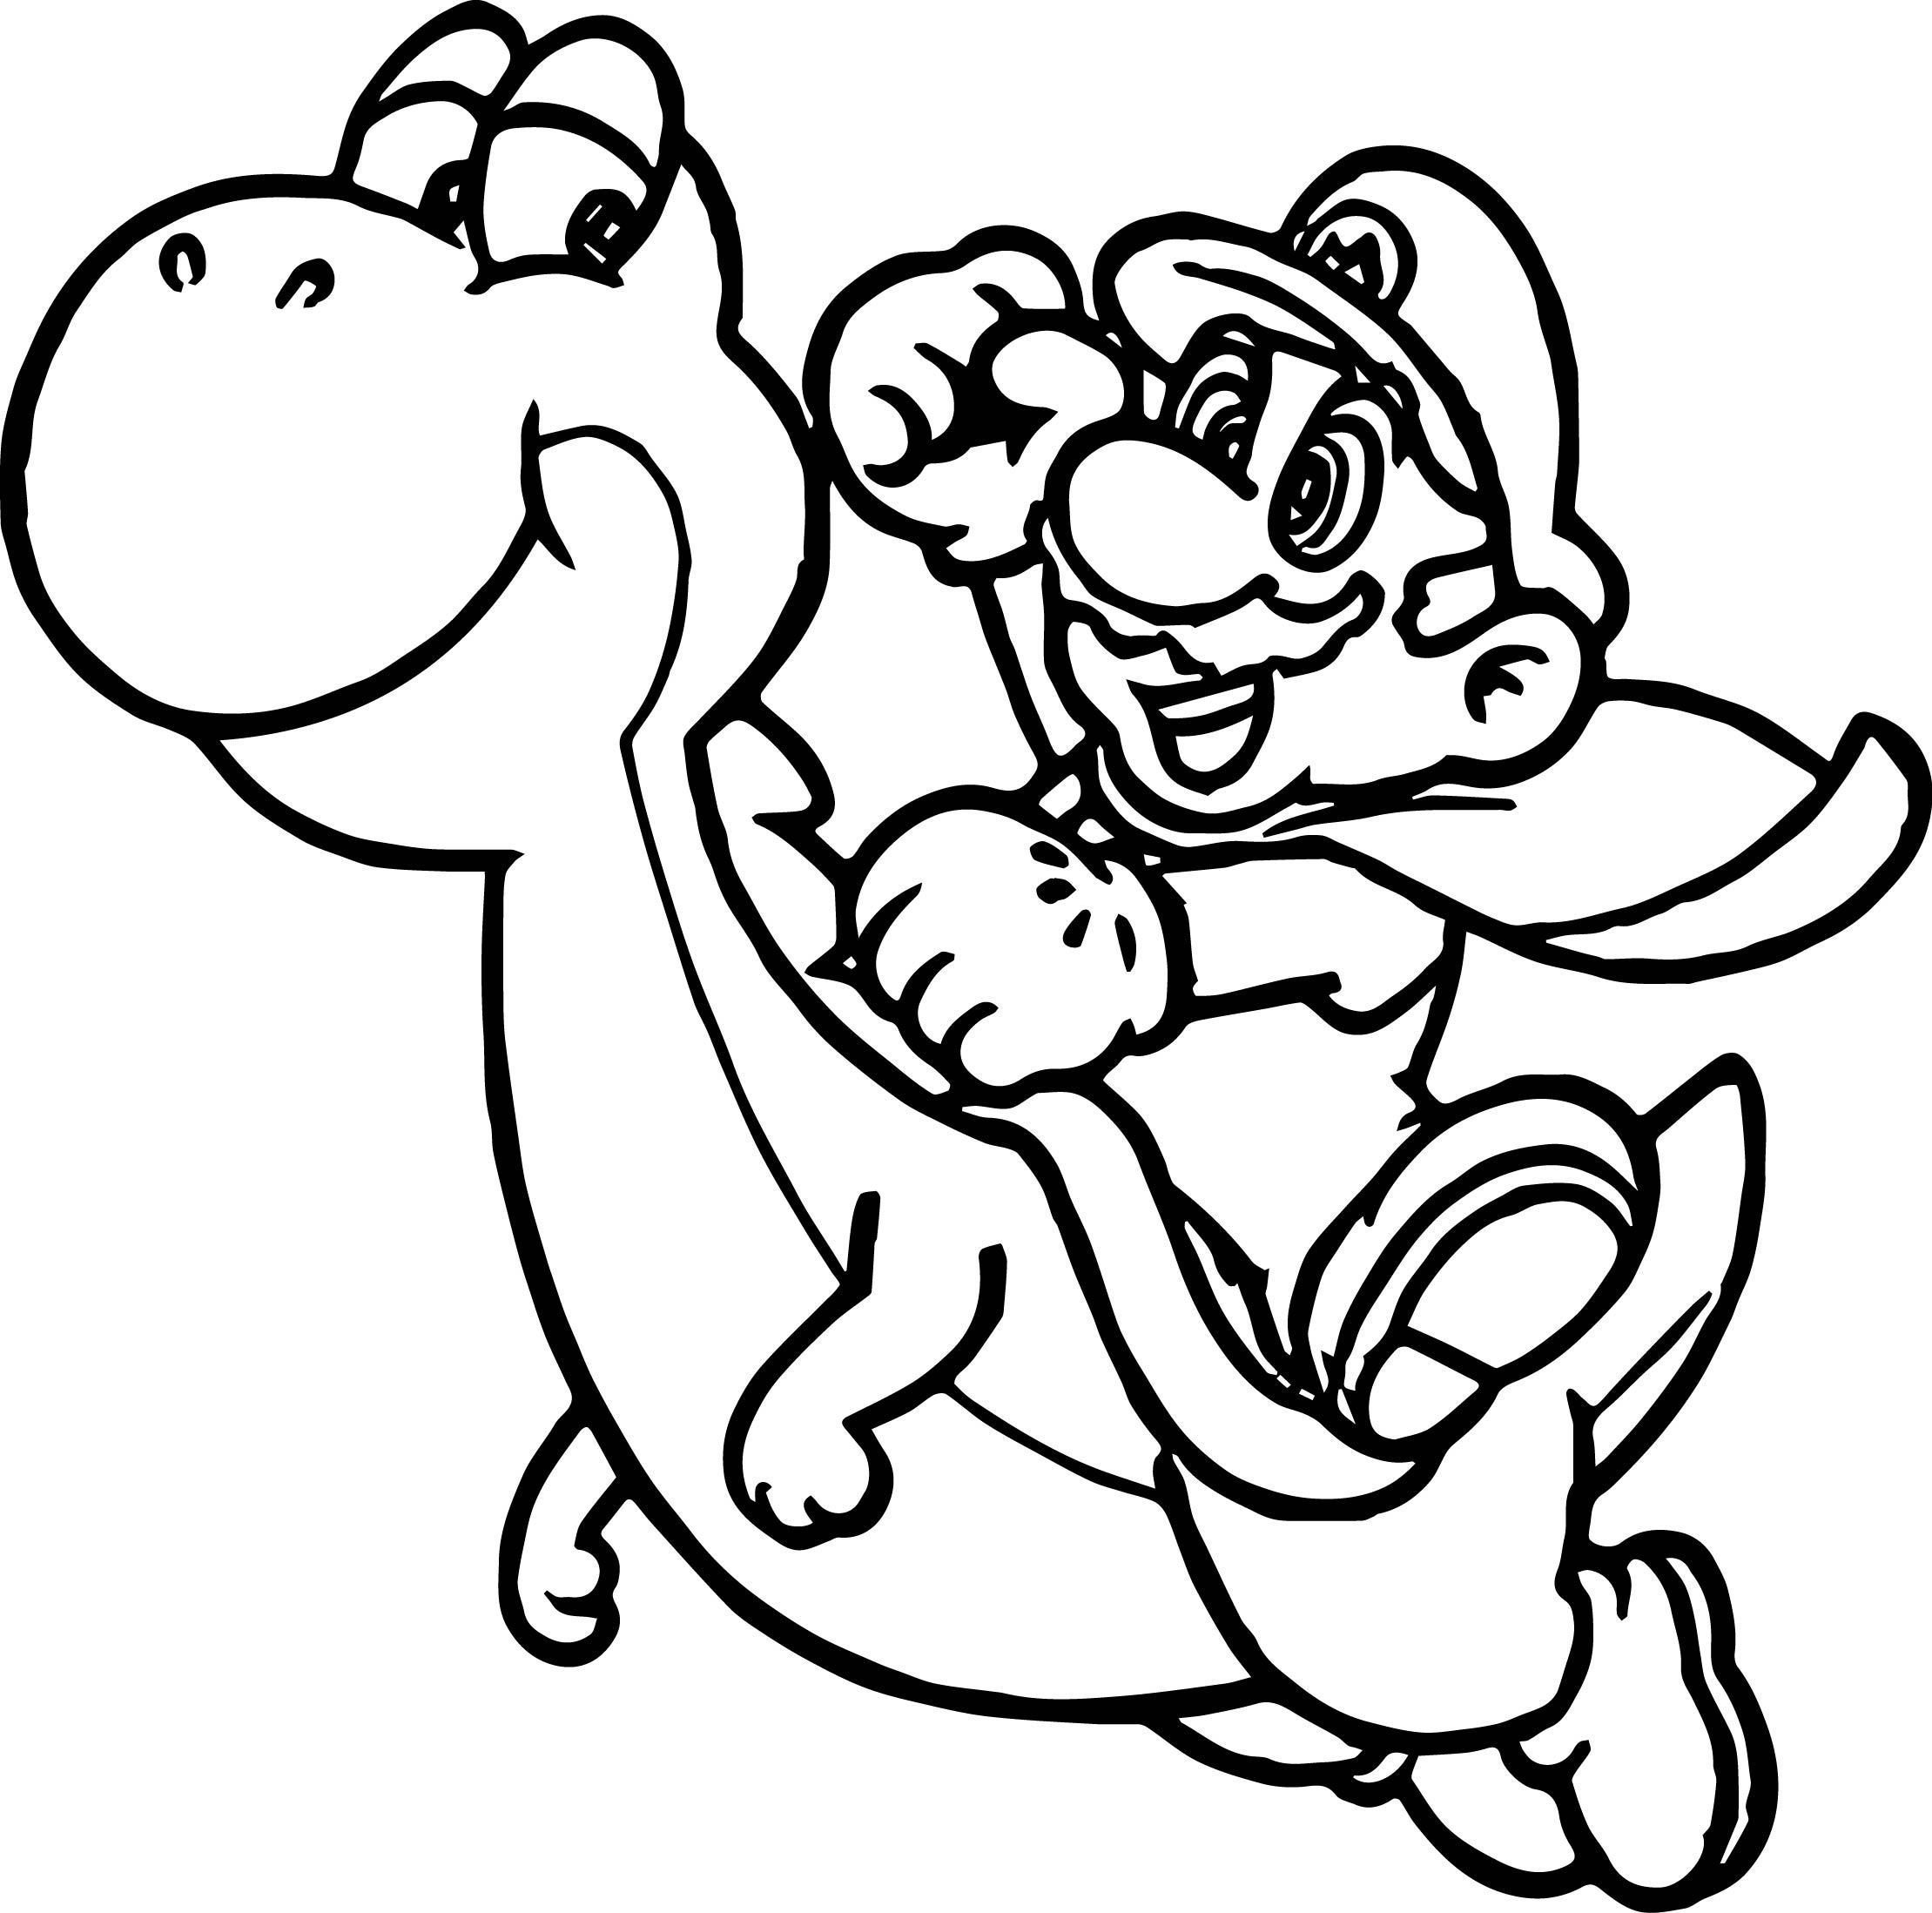 mario kart coloring page Mario kart coloring pages waluigi printable sheets characters go wii draw print bike super drawing kids motorcycle color step clipart